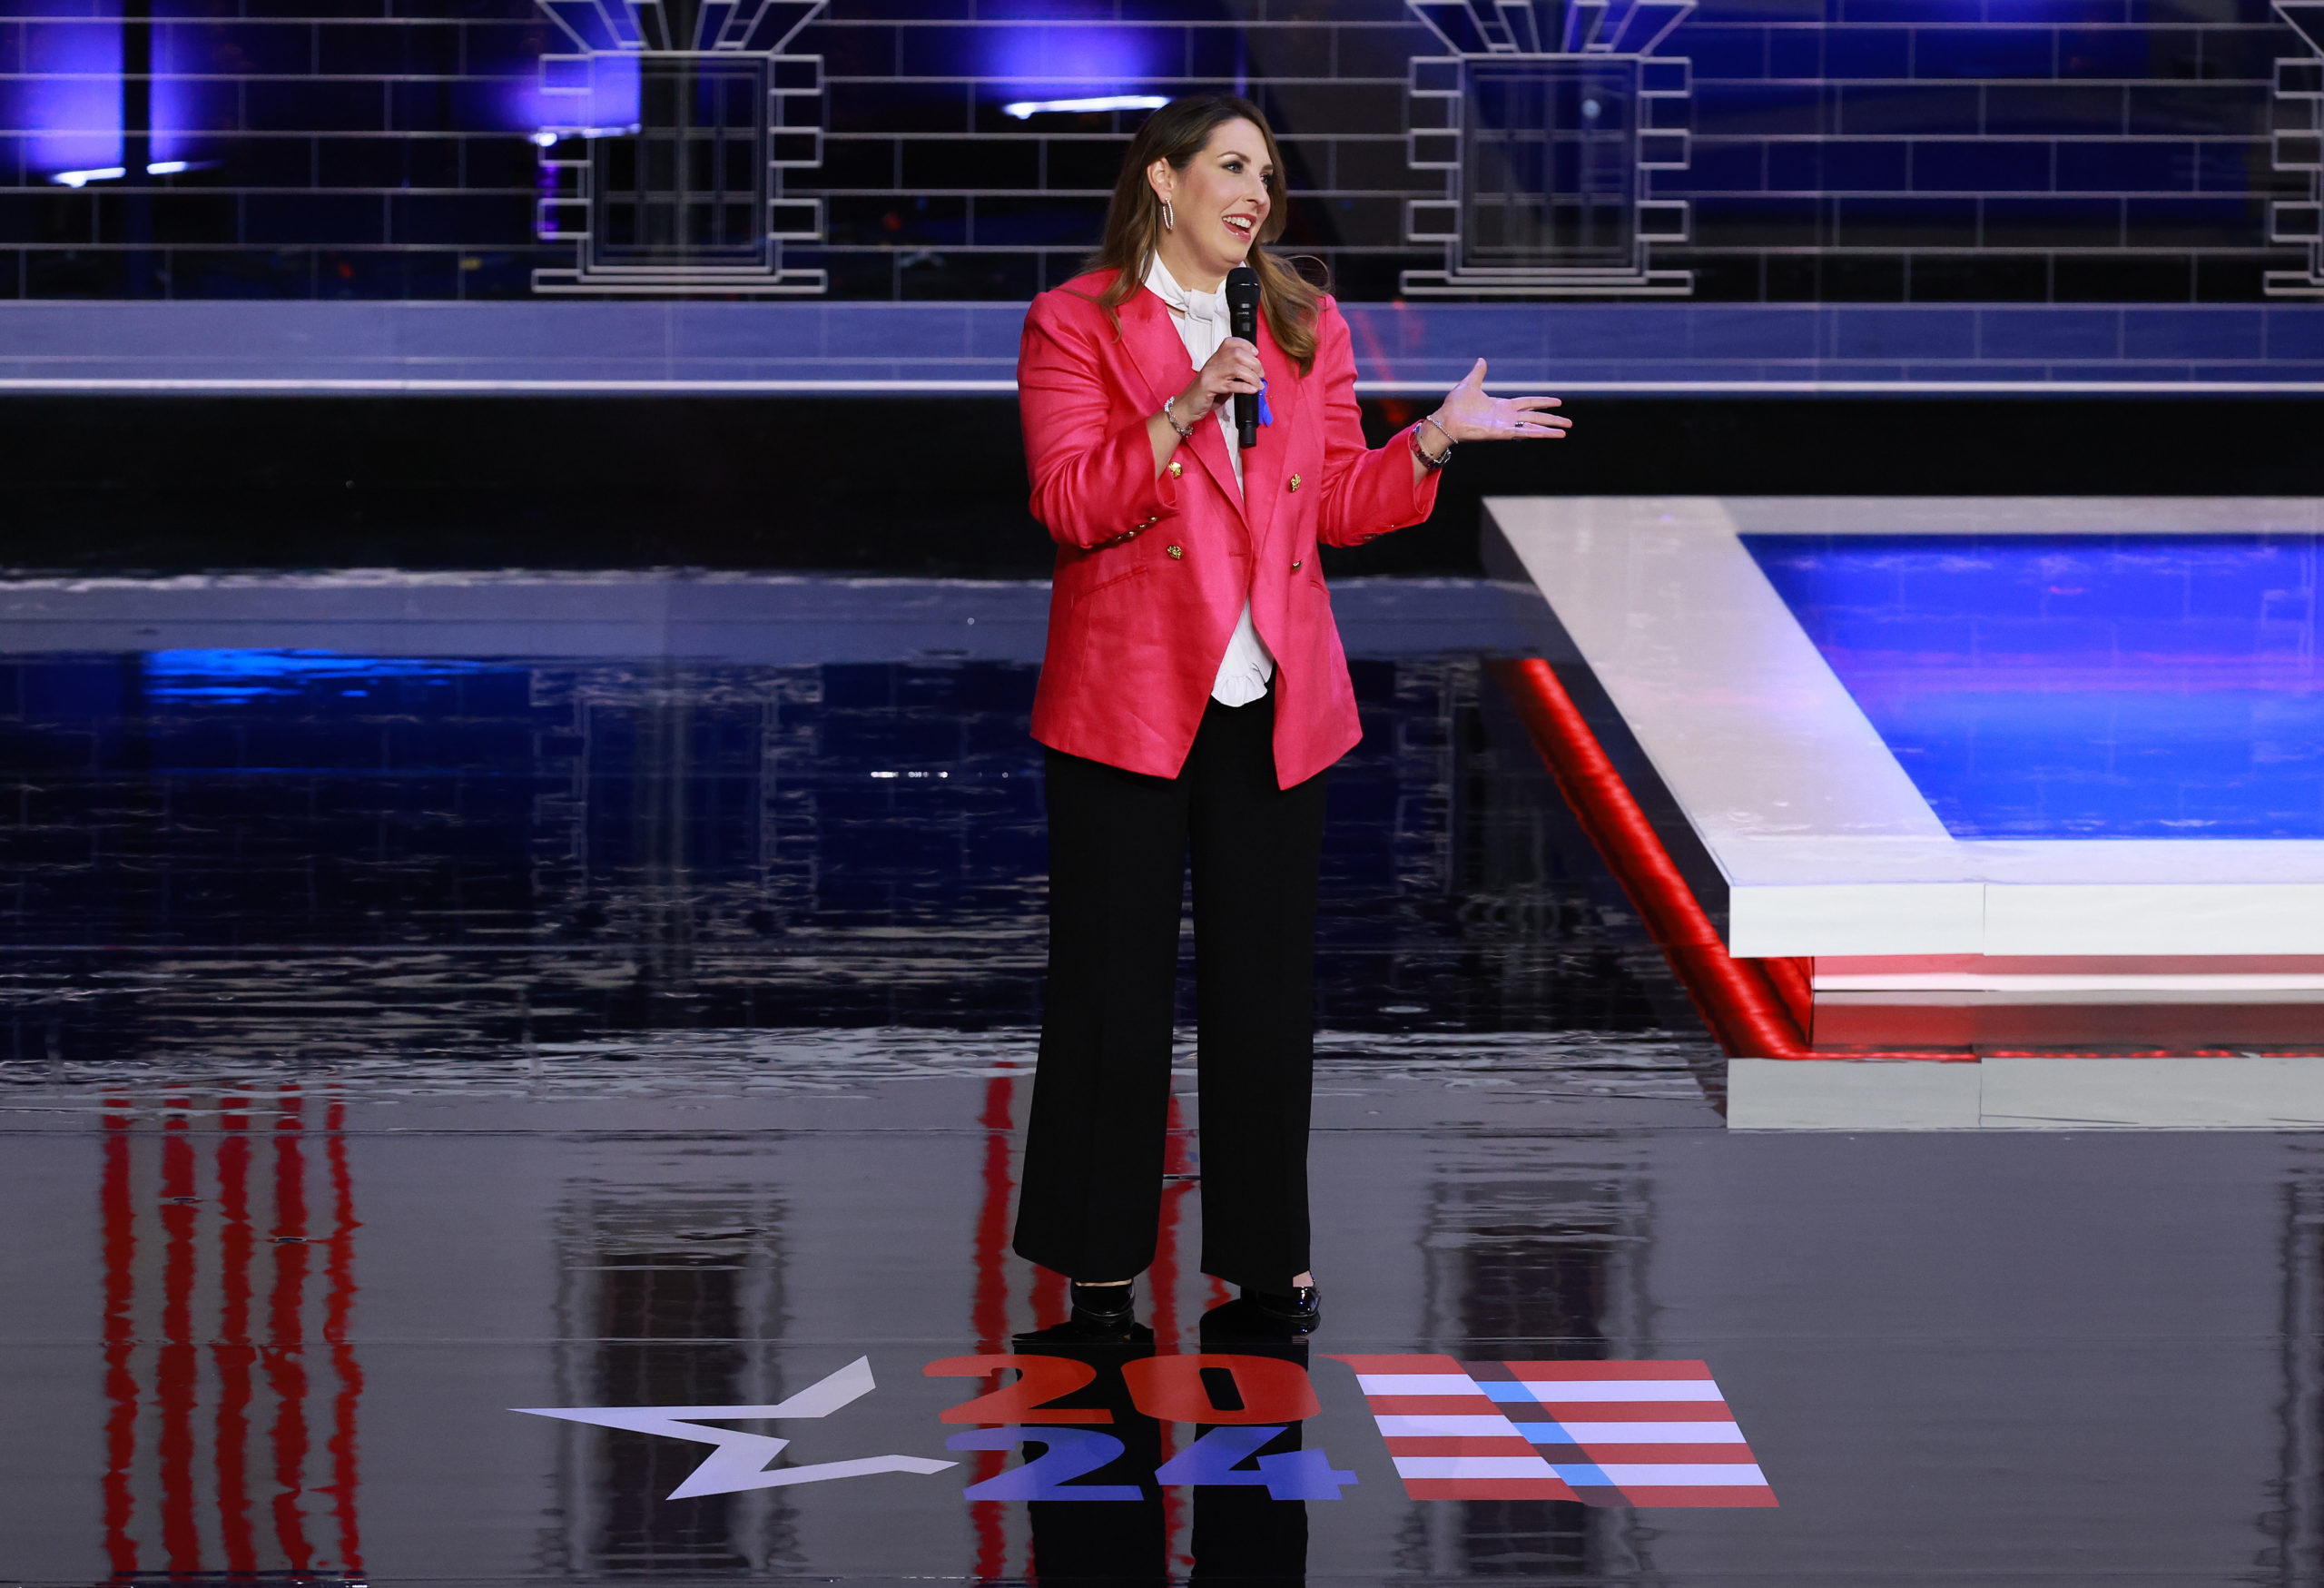 MIAMI, FLORIDA - NOVEMBER 08: RNC Chairwoman Ronna McDaniel delivers remarks before the NBC News Republican Presidential Primary Debate at the Adrienne Arsht Center for the Performing Arts of Miami-Dade County on November 8, 2023 in Miami, Florida. Five presidential hopefuls including, former New Jersey Gov. Chris Christie, former U.N. Ambassador Nikki Haley, Florida Gov. Ron DeSantis, Vivek Ramaswamy and U.S. Sen. Tim Scott (R-SC), squared off in the third Republican primary debate as former U.S. President Donald Trump, currently facing indictments in four locations, declined again to participate. (Photo by Joe Raedle/Getty Images)